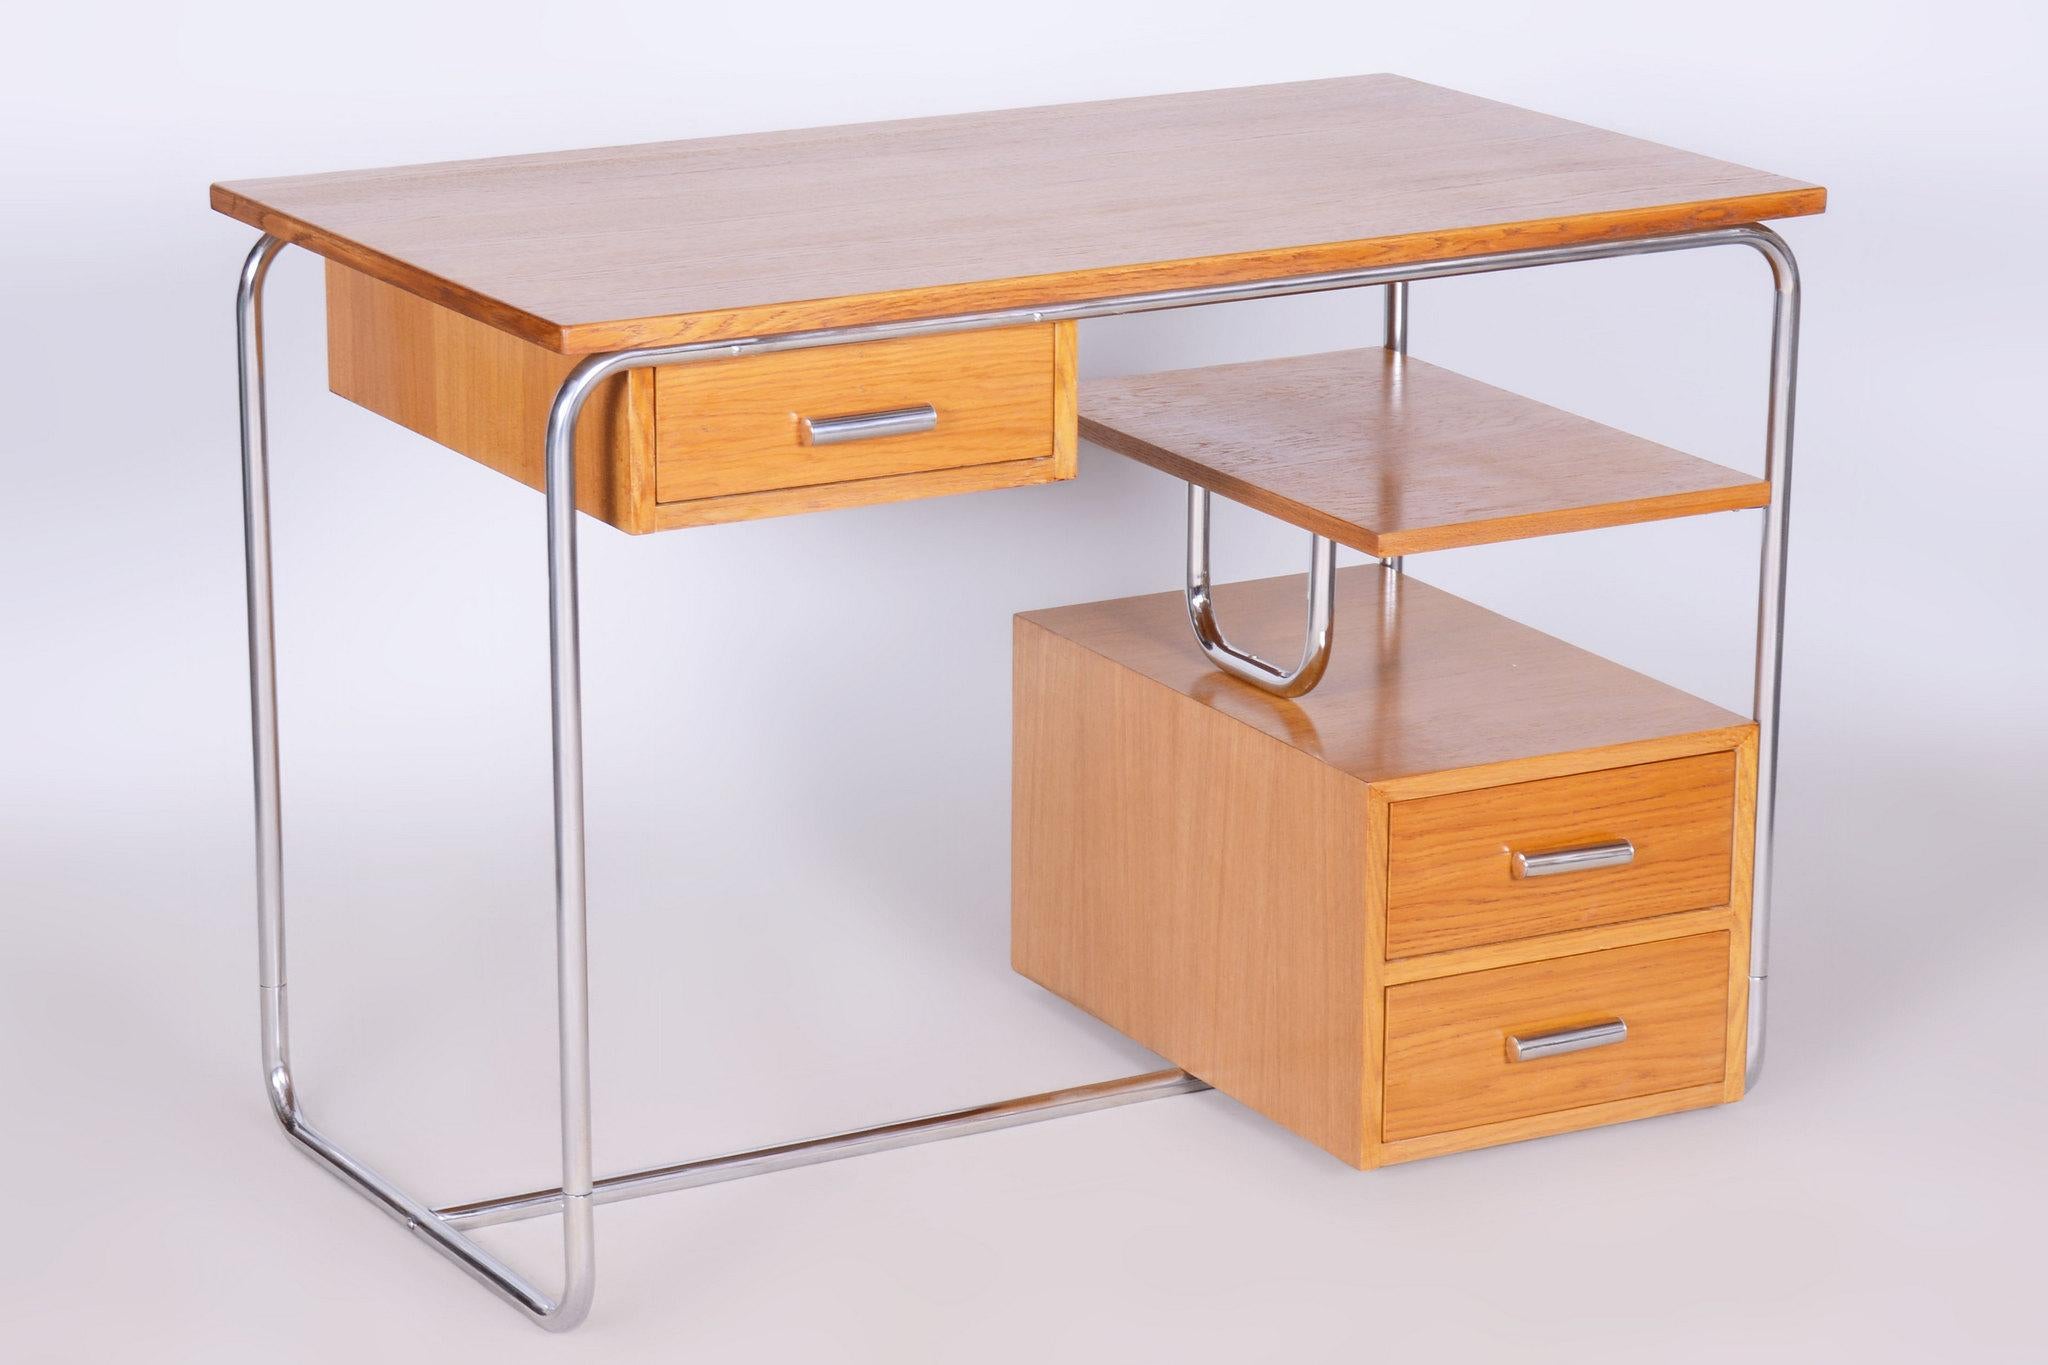 20th Century Restored Bauhaus Writing Desk, Oak, Chrome-Plated Steel, Germany, 1930s For Sale